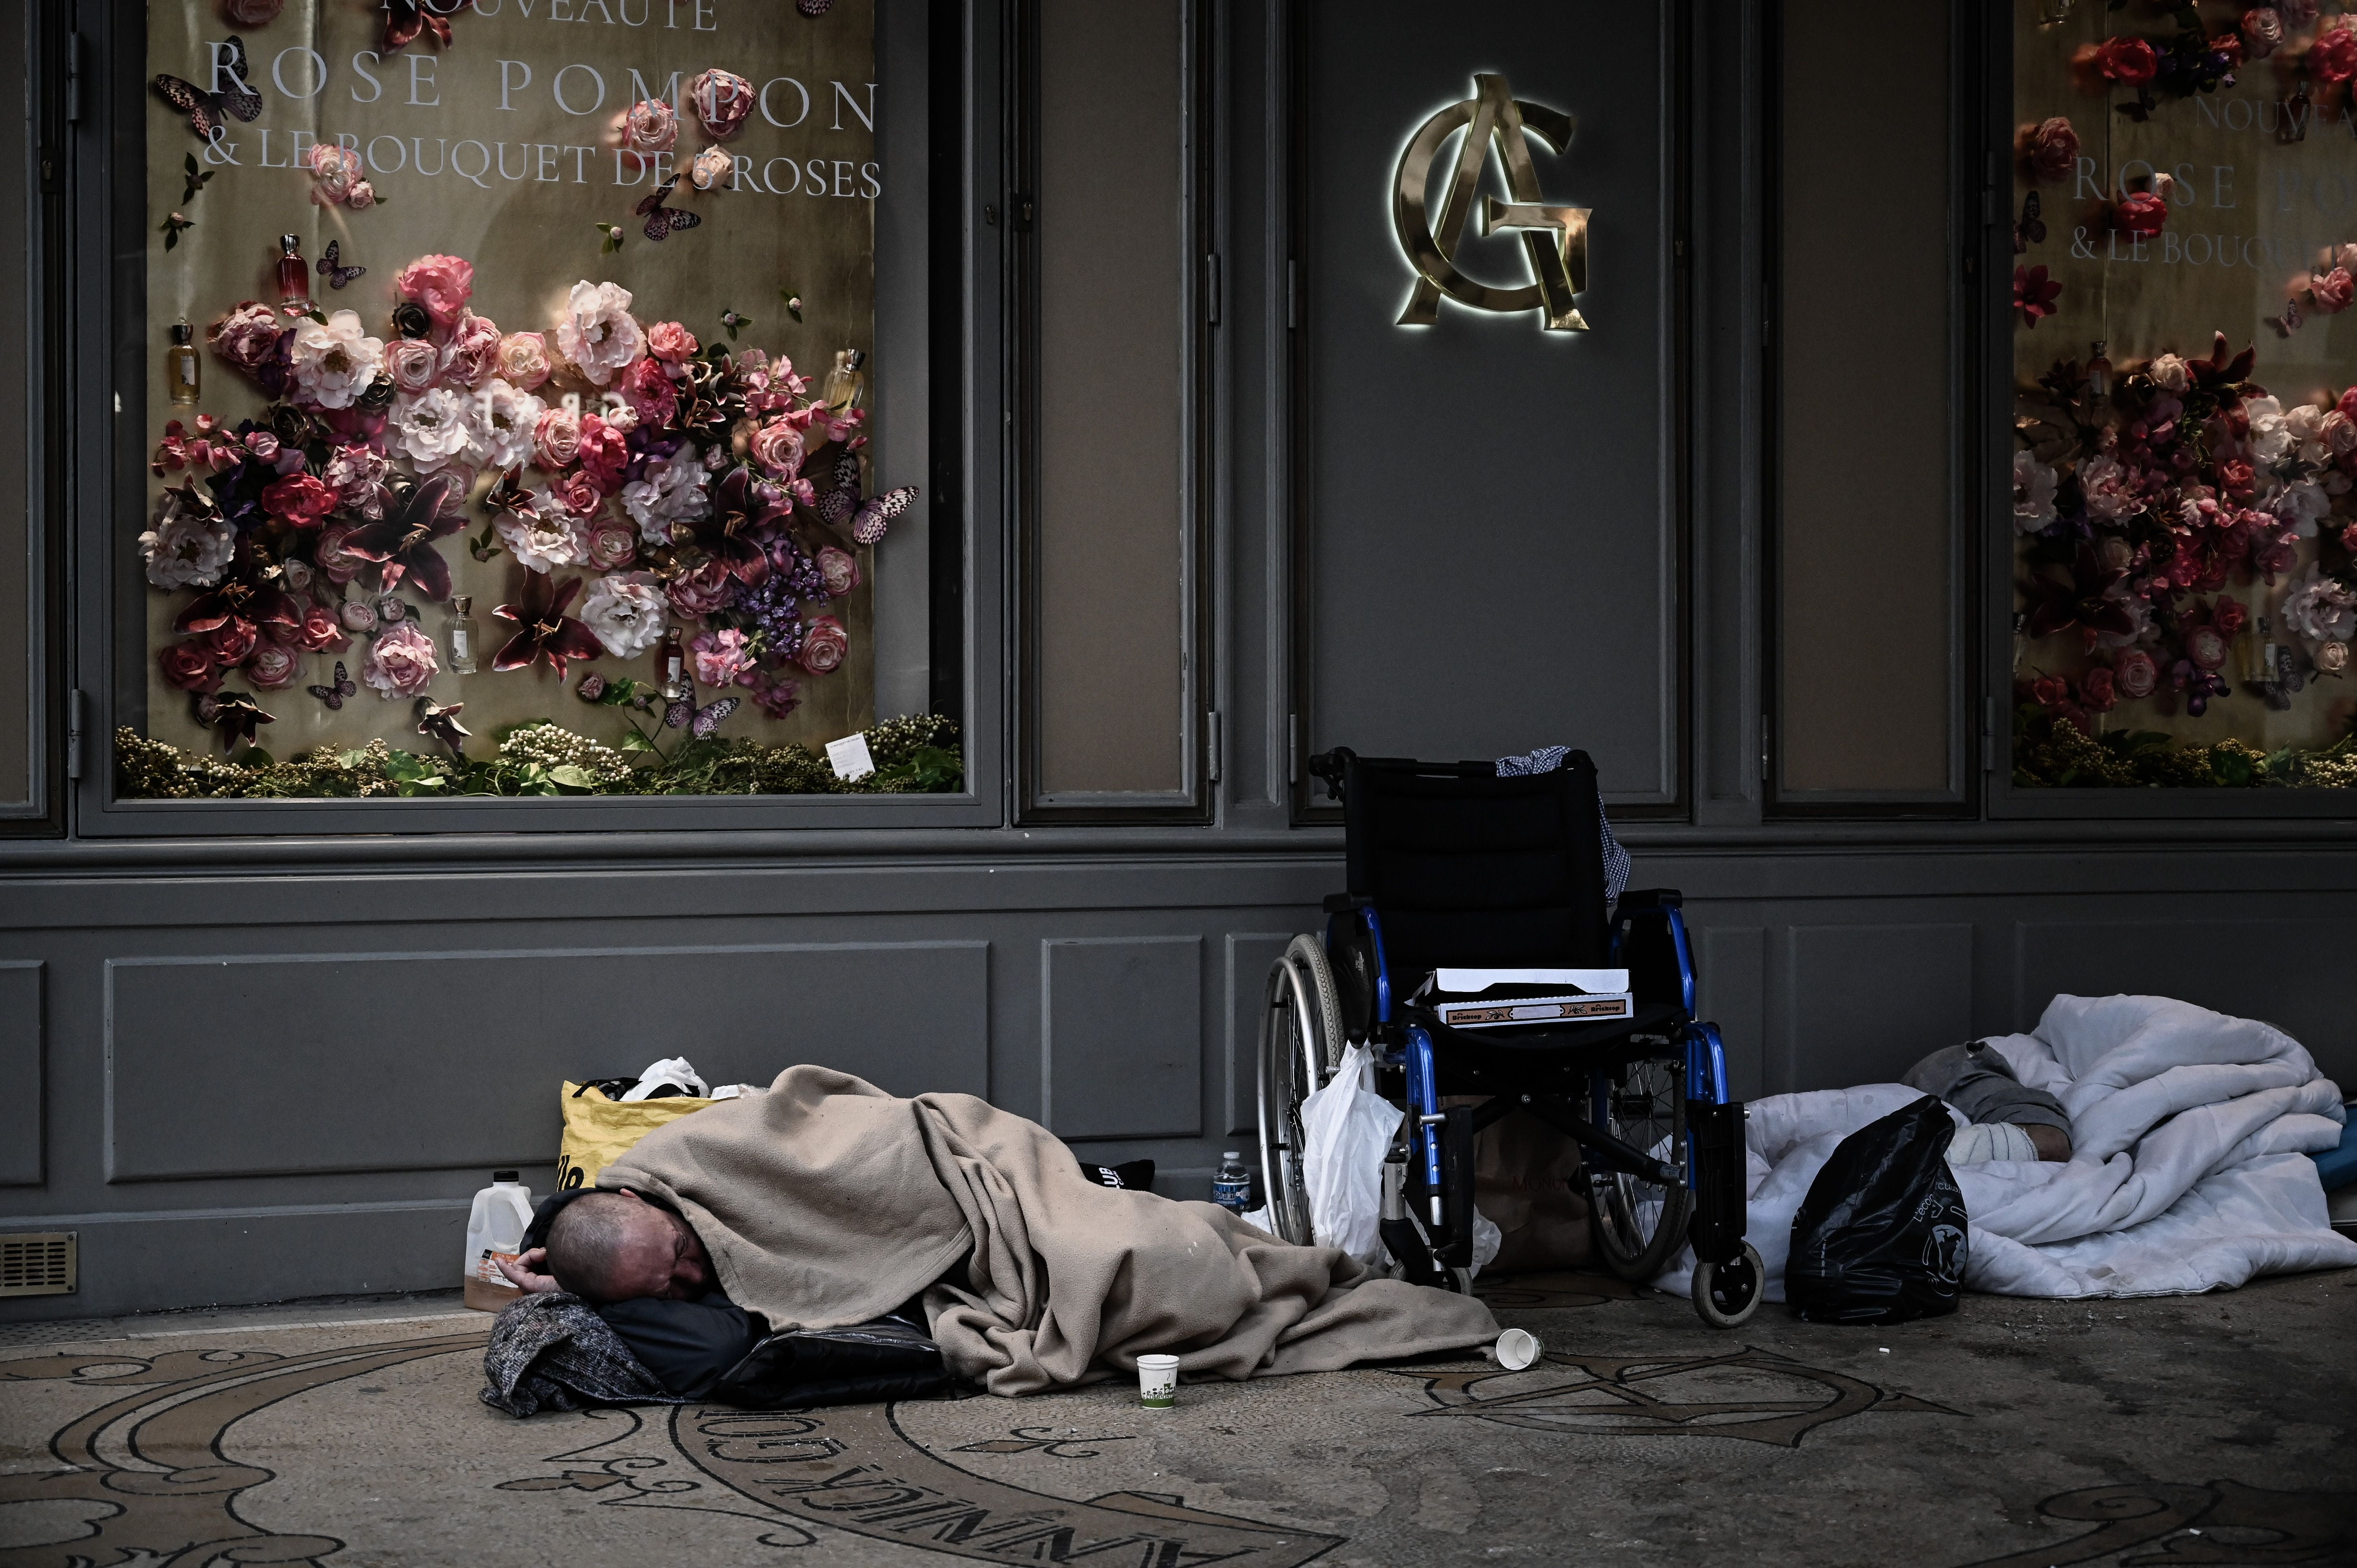 A homeless man sleeps in front of closed shops in Paris on 17 April 2020 during the first coronavirus lockdown